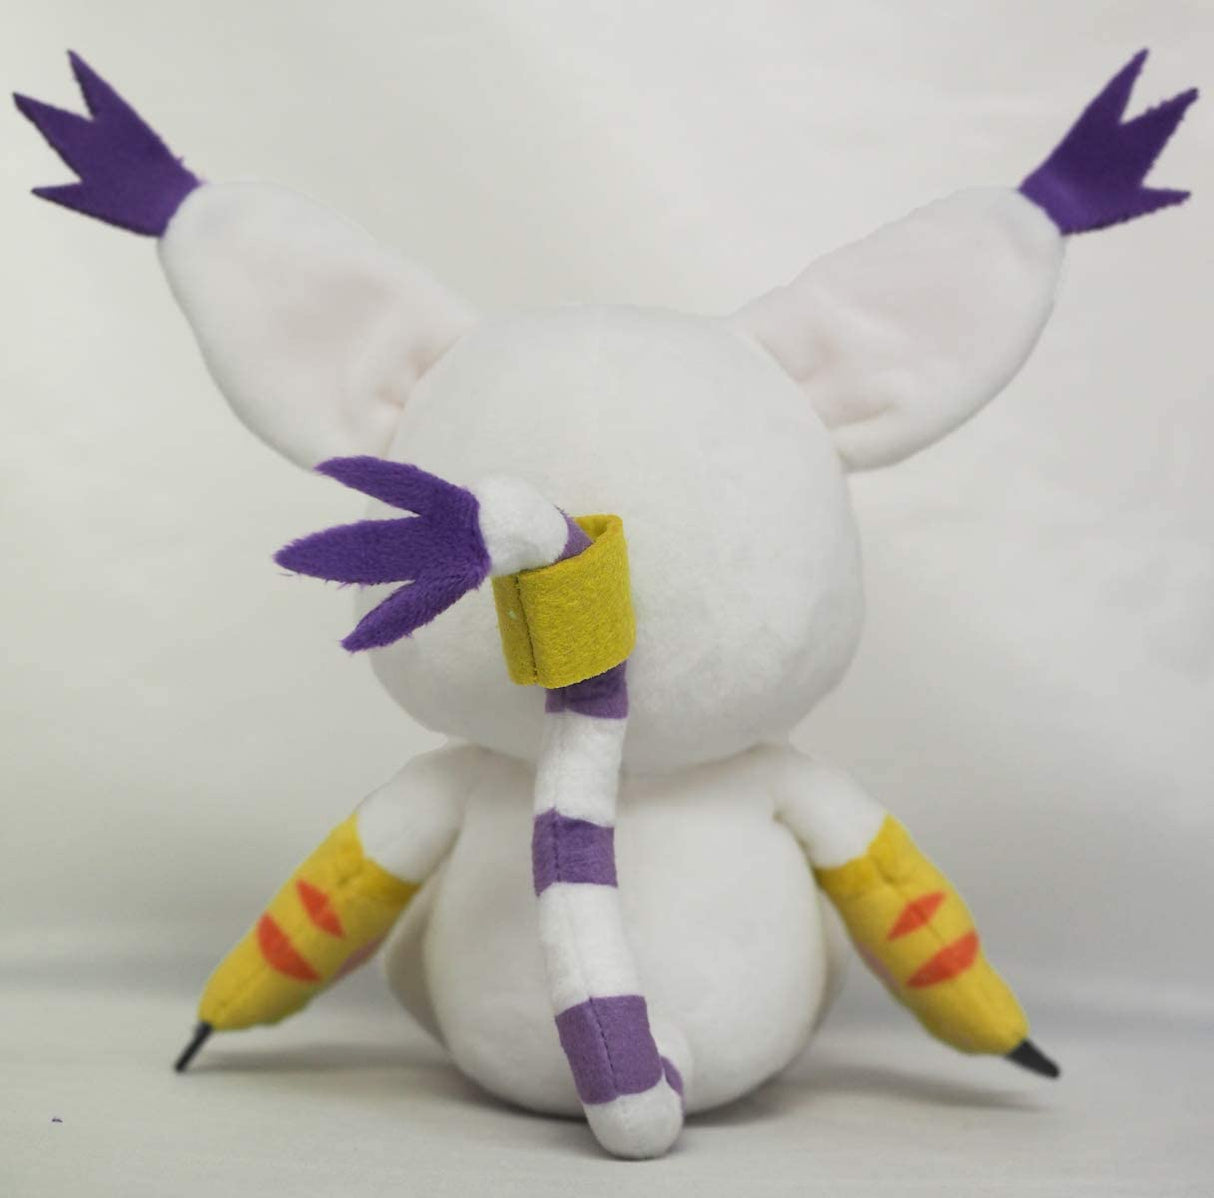 Digimon Adventure - Tailmon - Digimon Nuigurumi DG08 - S (San-ei), Plushie from the Digimon Adventure franchise by San-ei, released on March 31, 2019, sold at Nippon Figures.